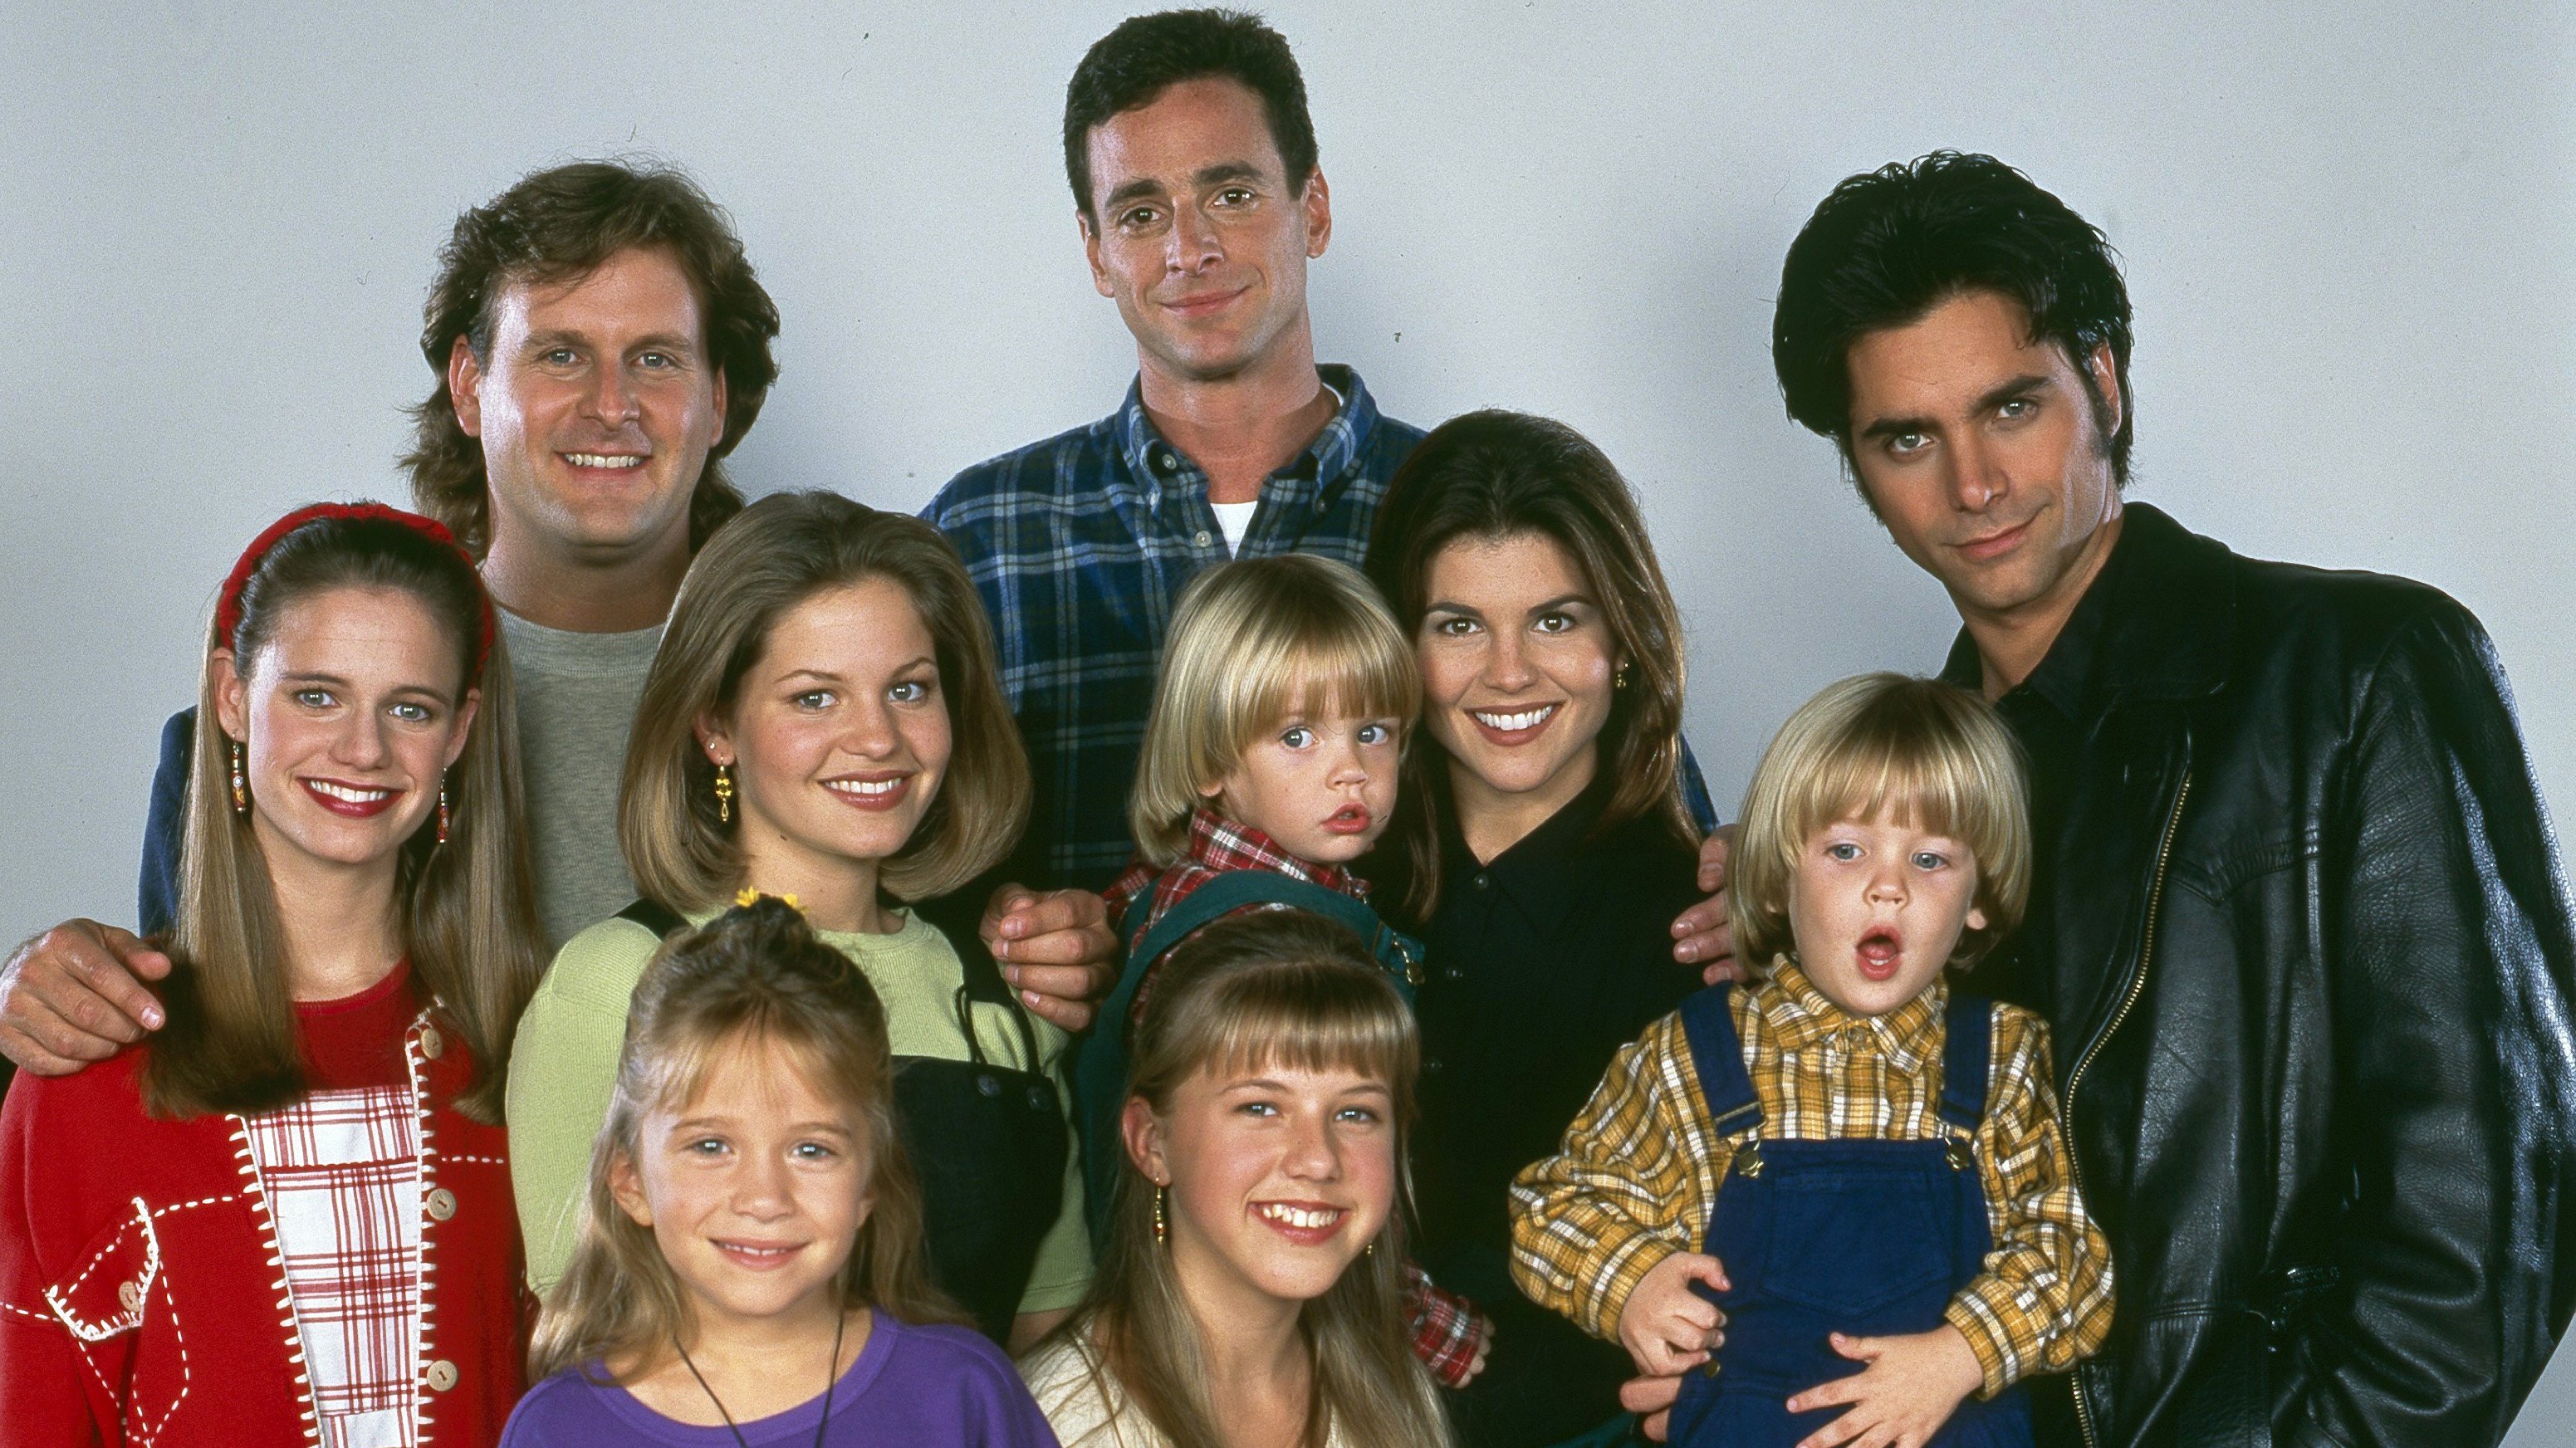 'Full House' cast Where are they now?